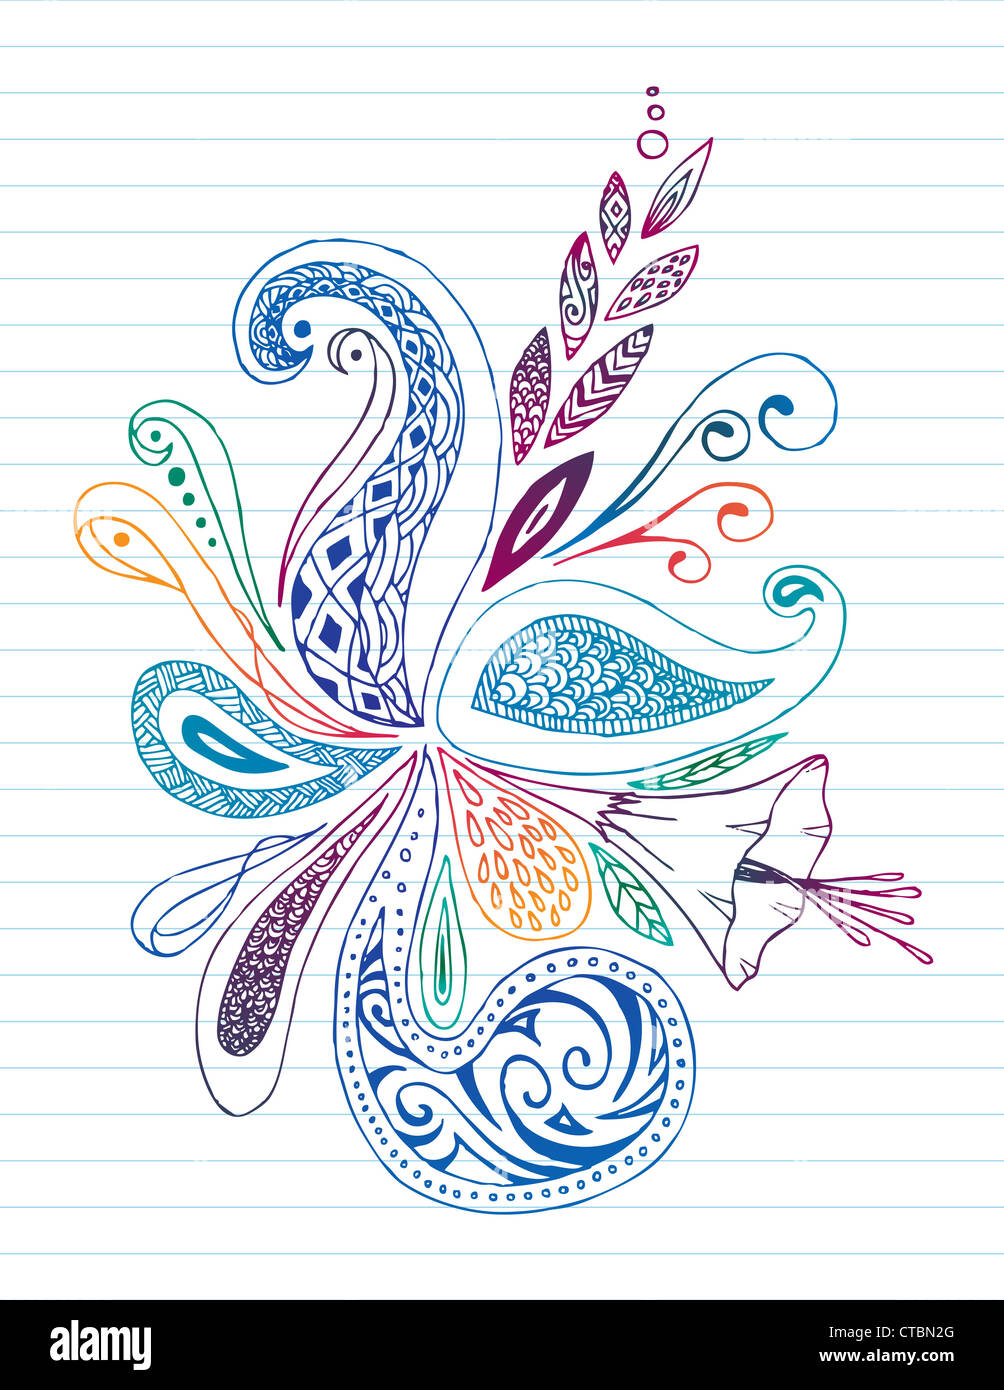 Floral doodle on lined paper. Stock Photo